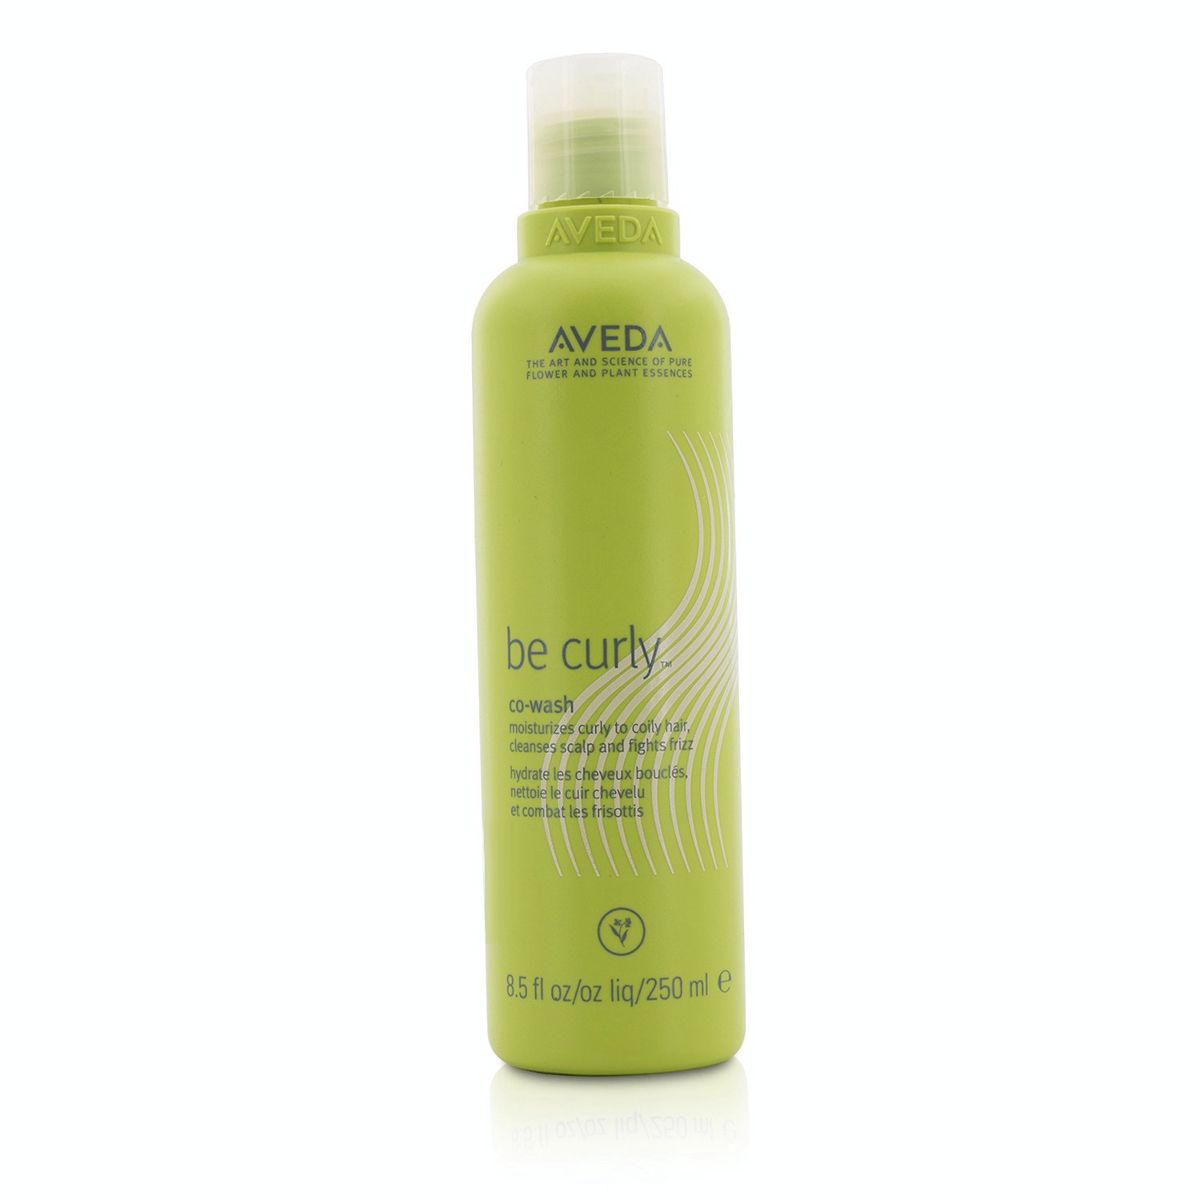 Be Curly Co-Wash Aveda Image